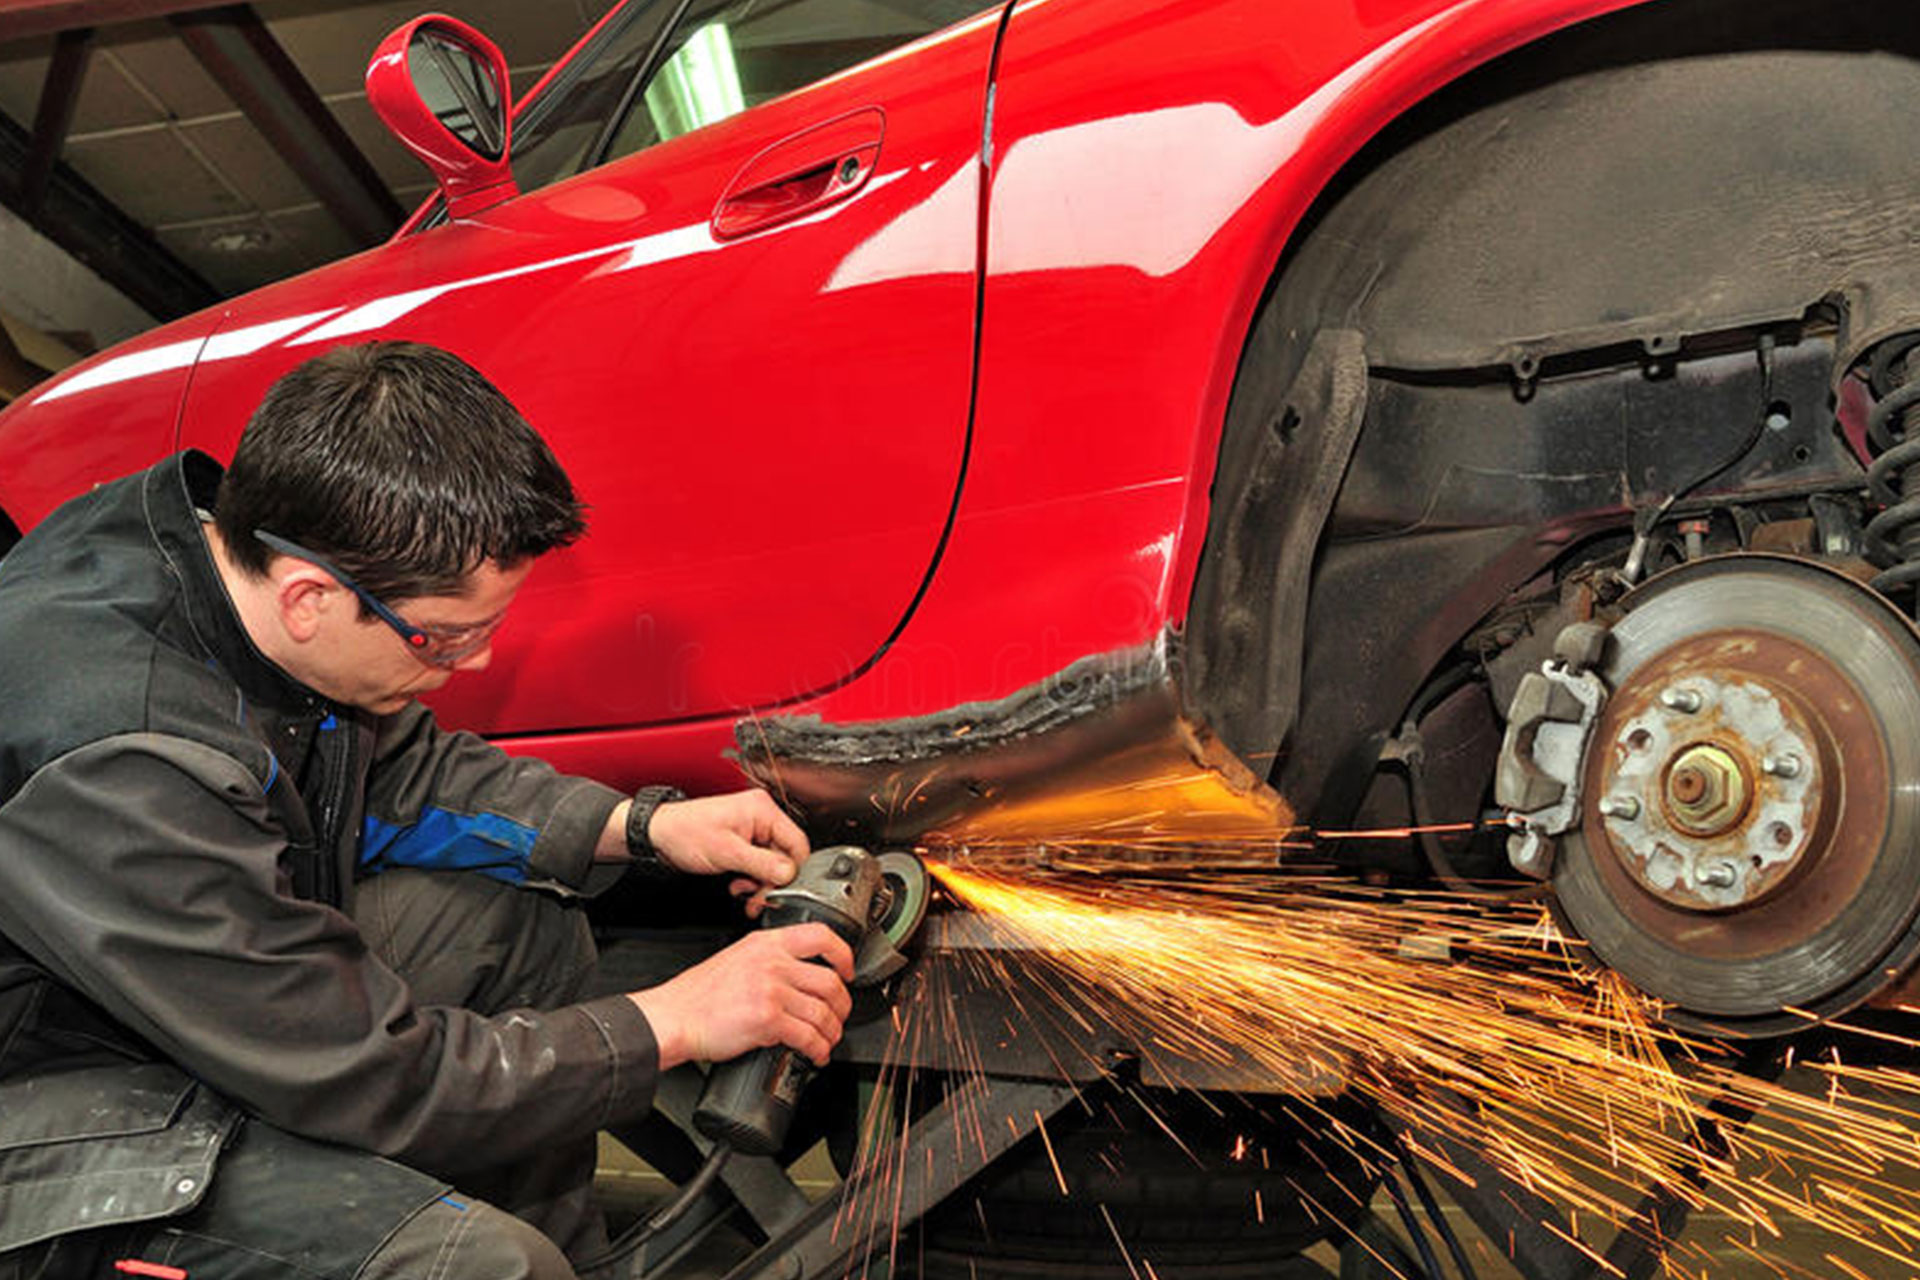 TEC offers car body repairers a lifeline